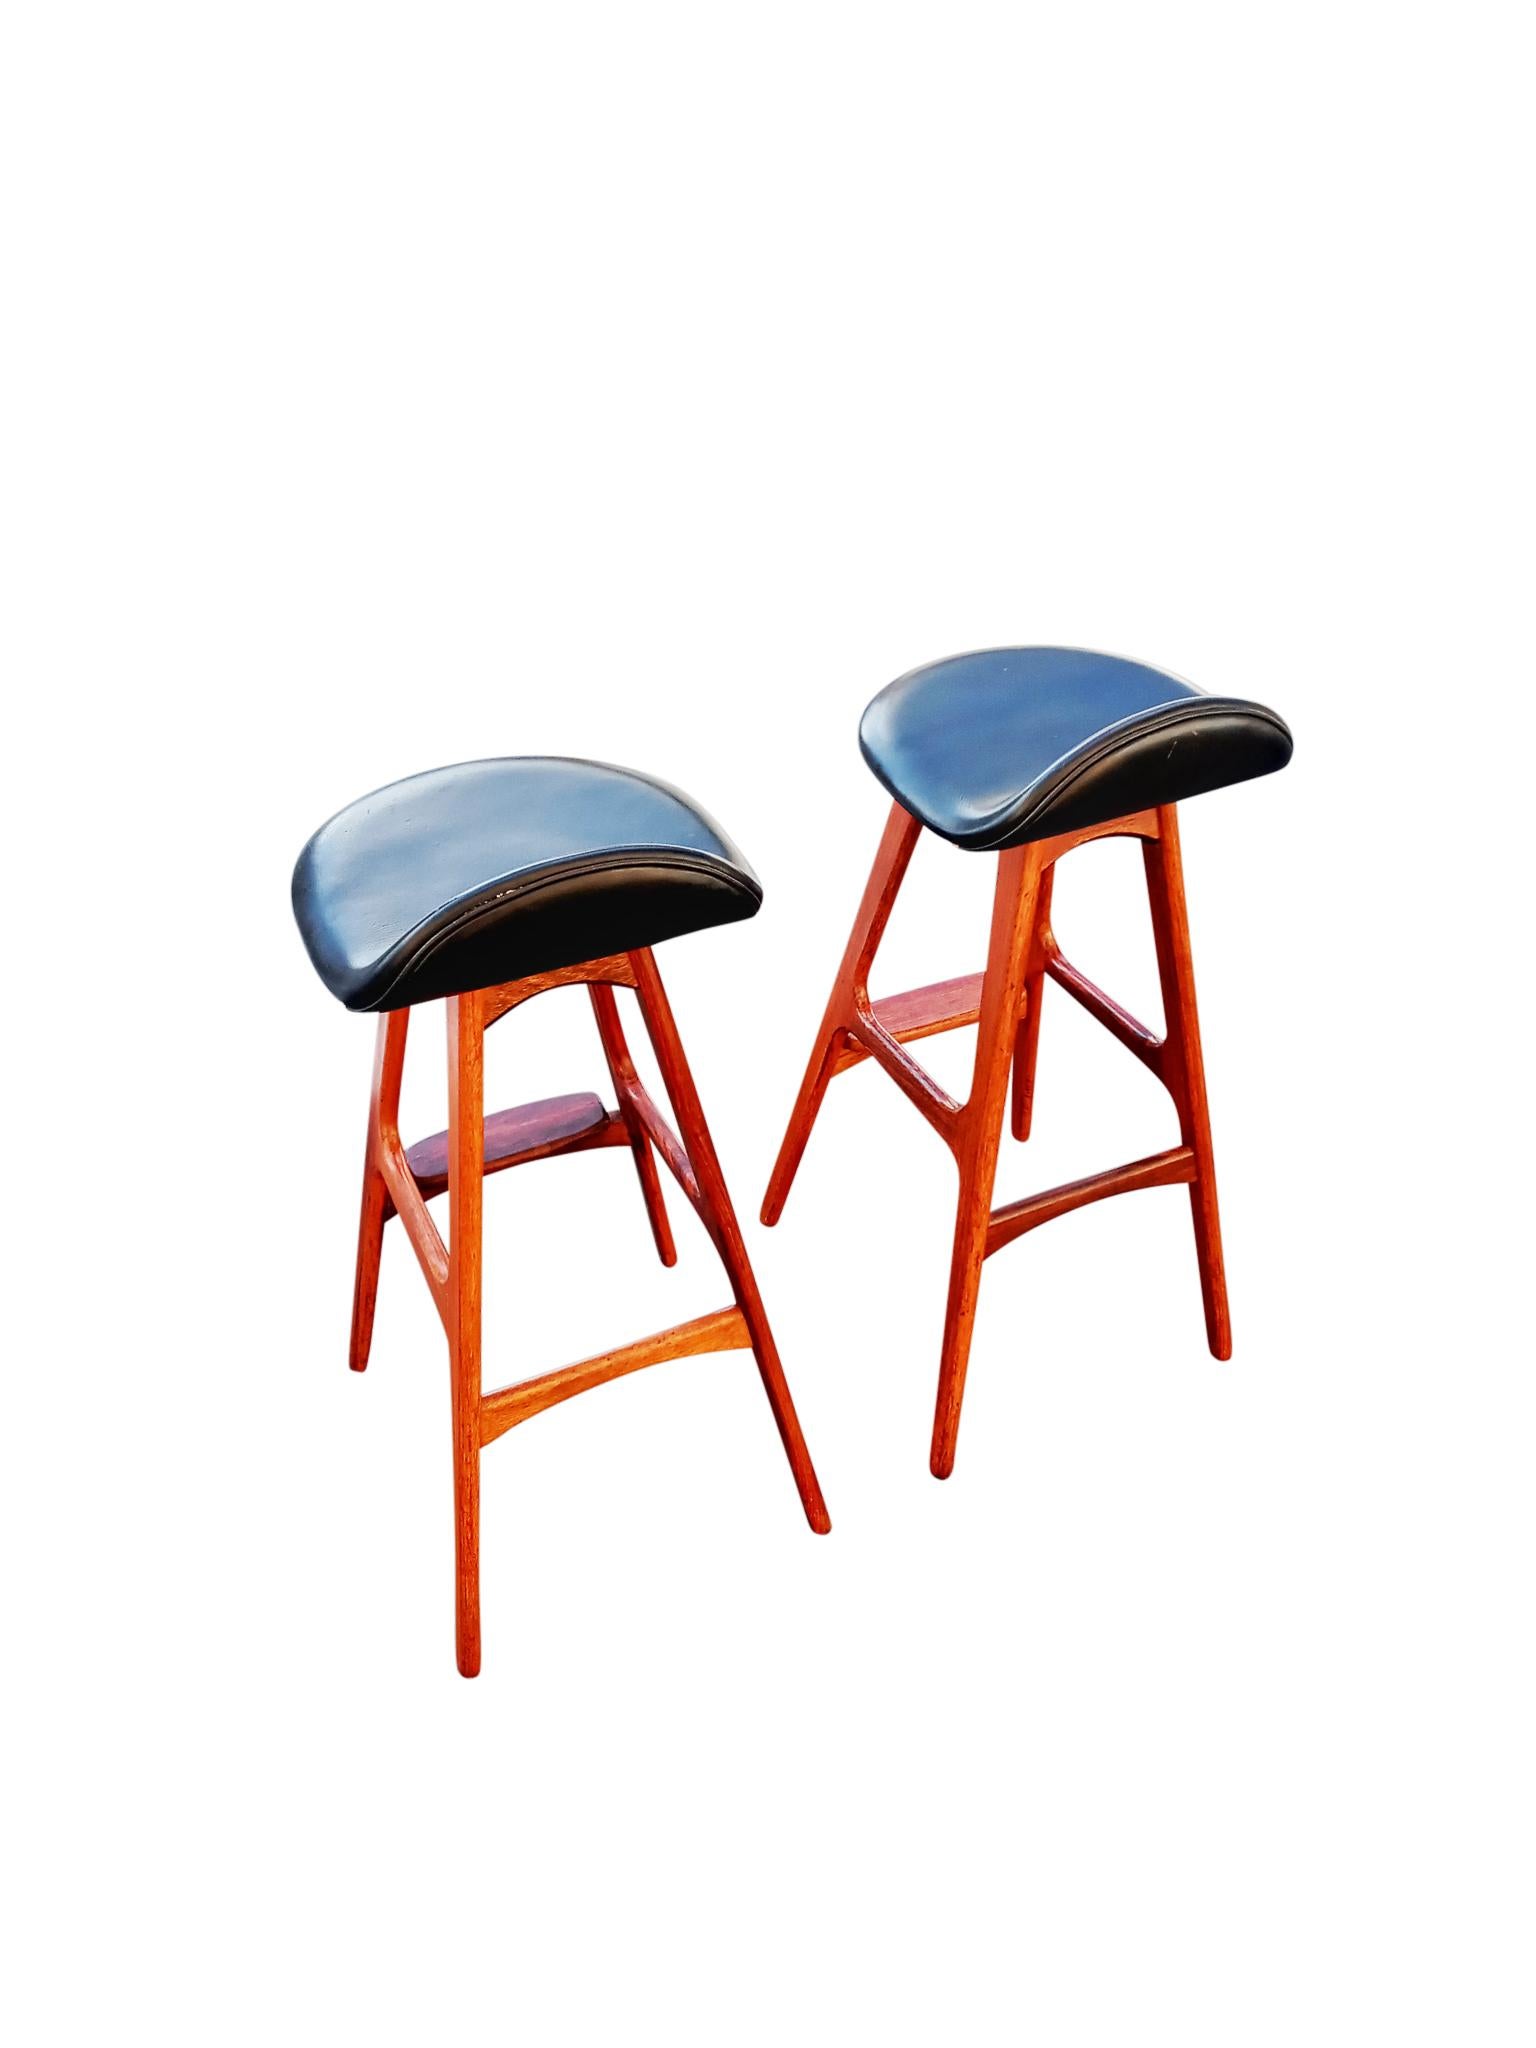 Erik Buck or Buch Oddense Maskinsnedkeri A/S Danish Pair Rosewood Leather Stools In Good Condition For Sale In Philadelphia, PA